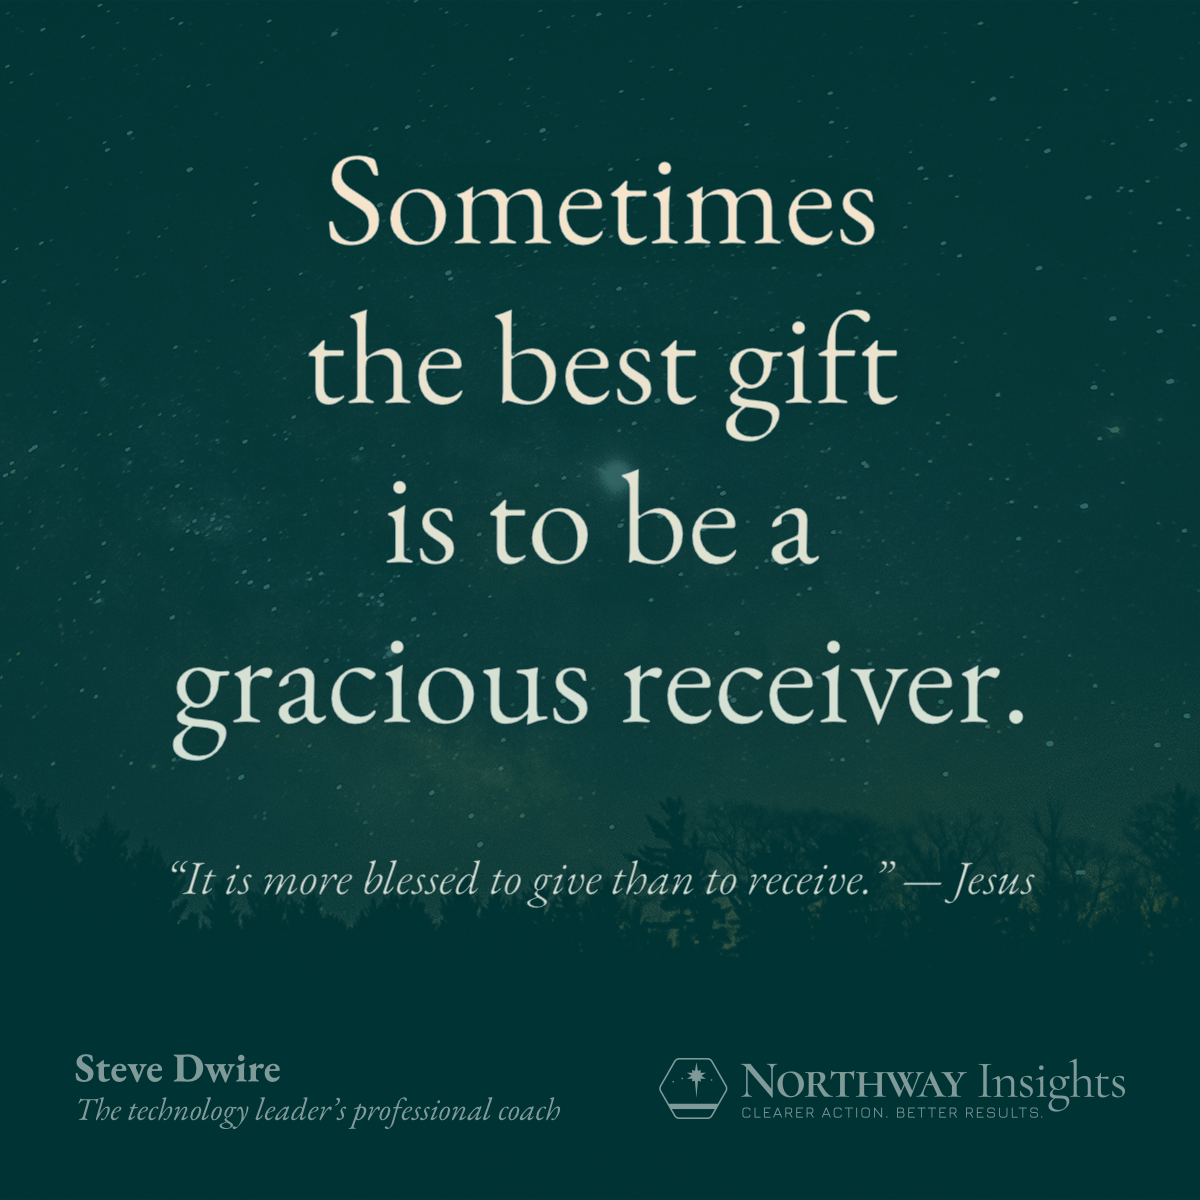 Sometimes the best gift is to be a gracious receiver.